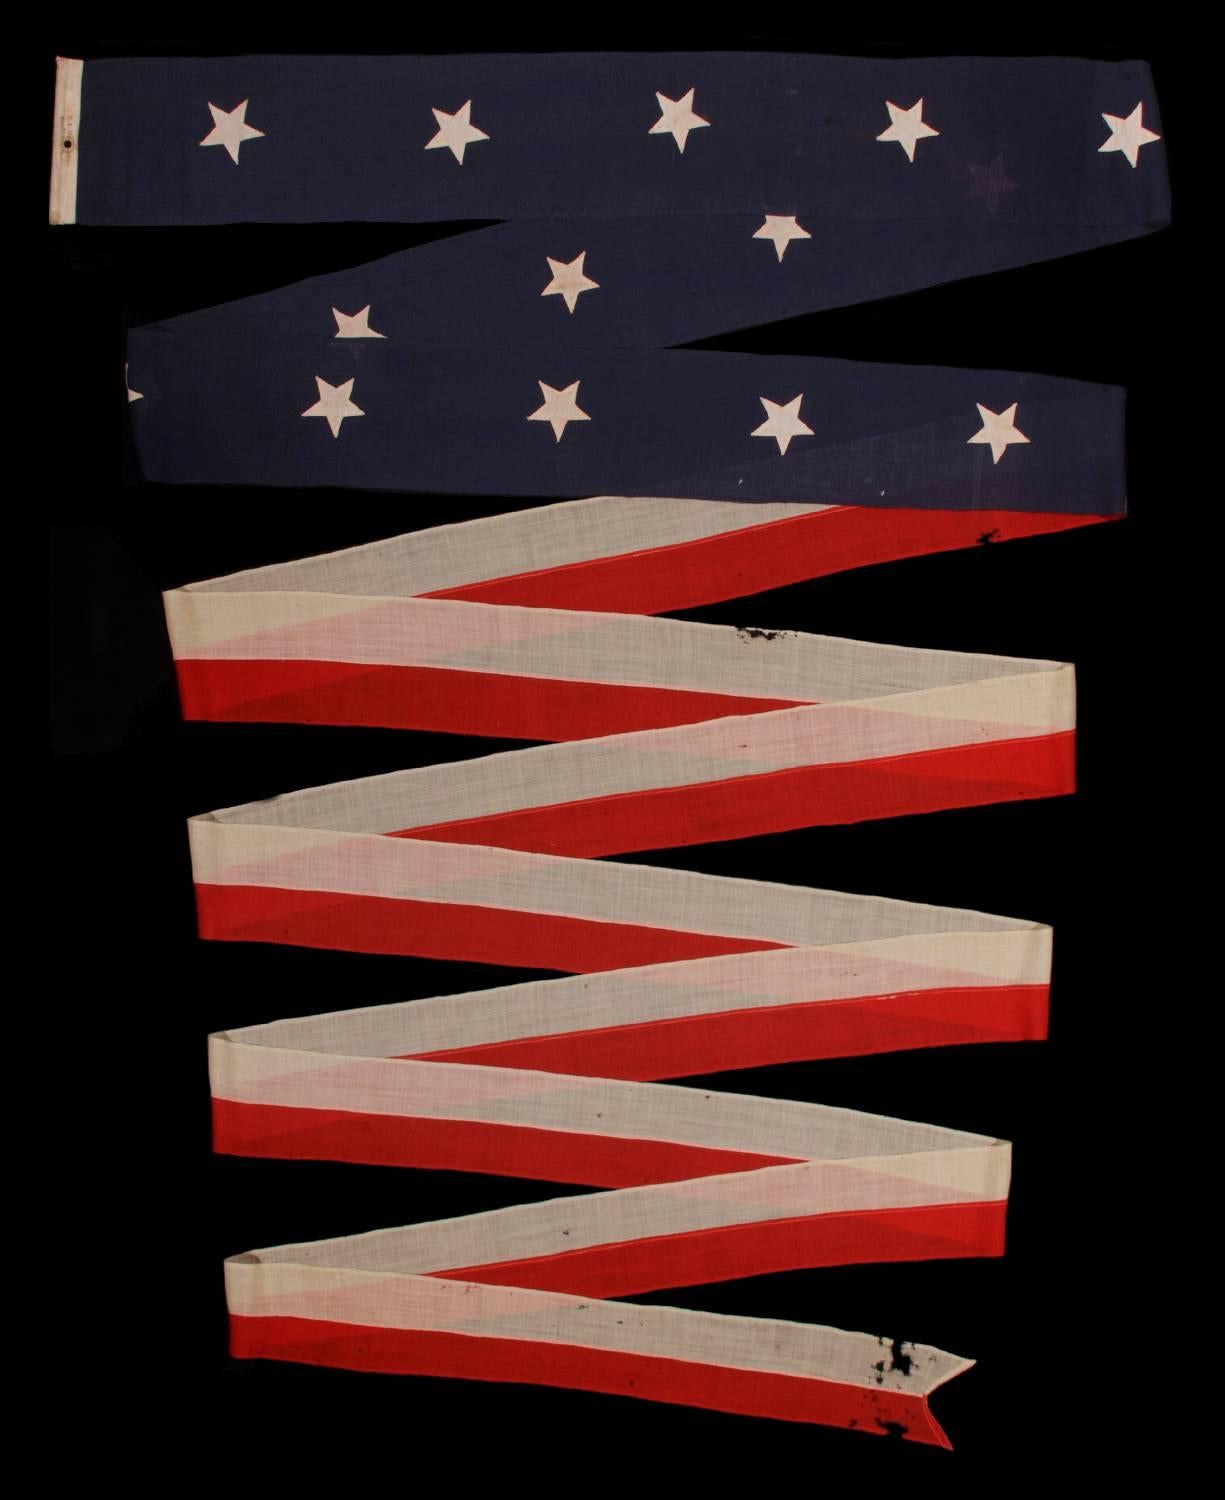 U.S. NAVY COMMISSION OR HOMEWARD-BOUND PENNANT WITH 14 STARS, MADE BY E.L. ROWE AND SONS OF GLOUCHESTER, MASSACHUSETTS, MADE CA 1890-1909, WITH VERBAL HISTORY OF USE IN TEDDY ROOSEVELT'S GREAT WHITE FLEET 

 Commission pennants are the